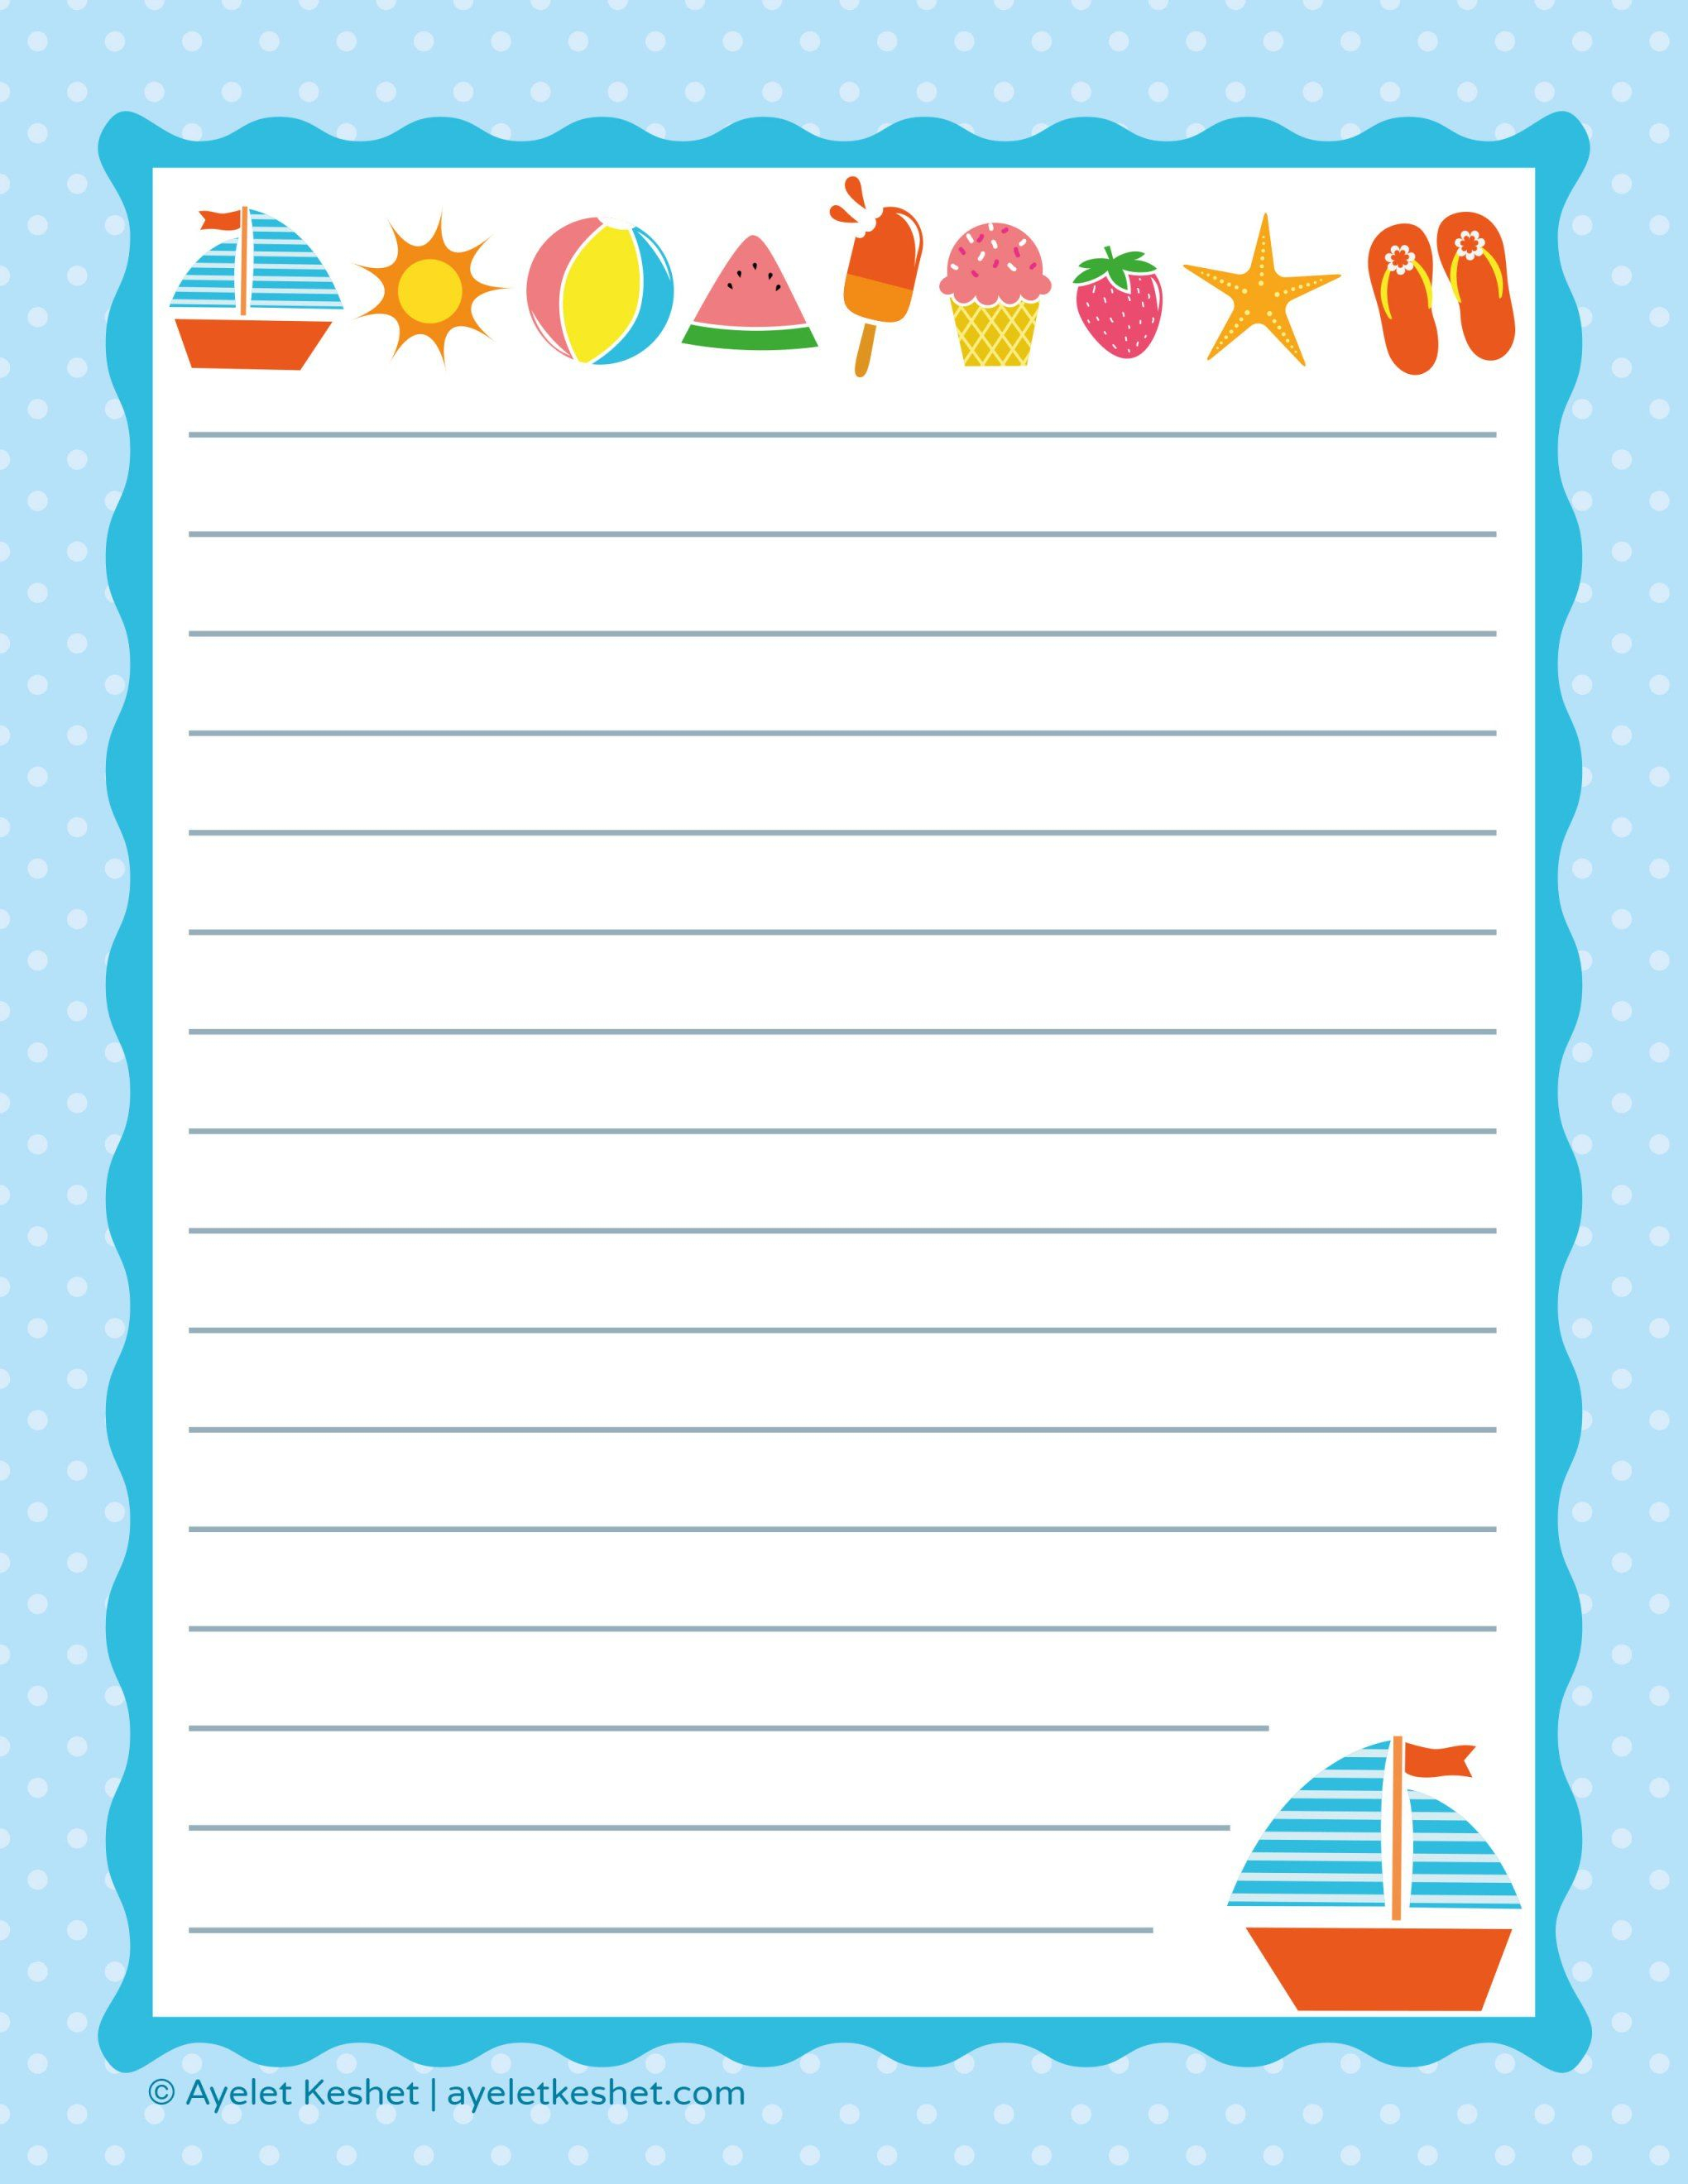 Free Printable Letter Paper | Printables To Go | Pinterest - Free Printable Writing Paper